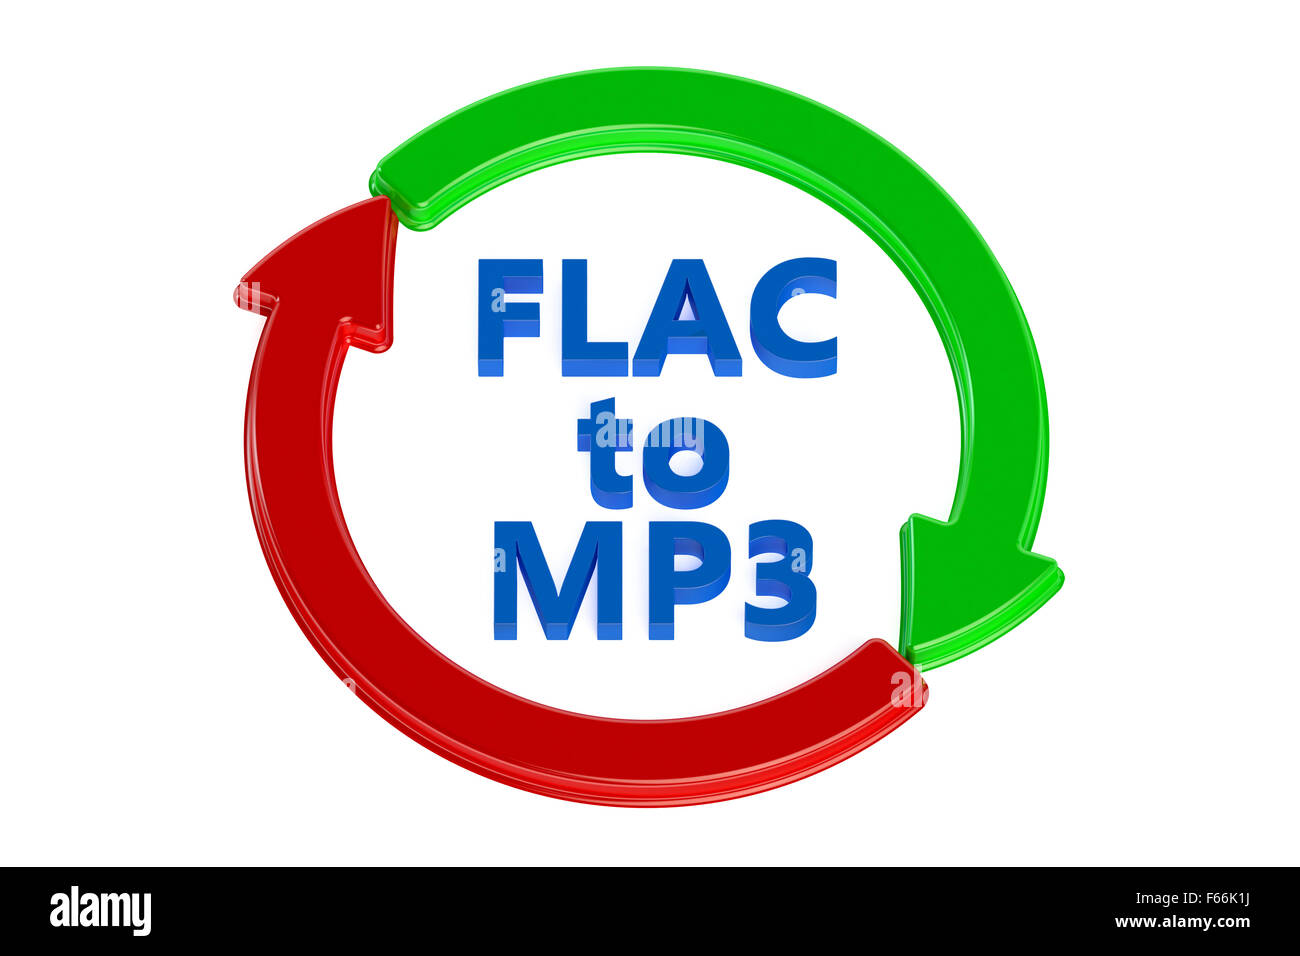 converting flac to mp3 concept isolated on white background Stock Photo